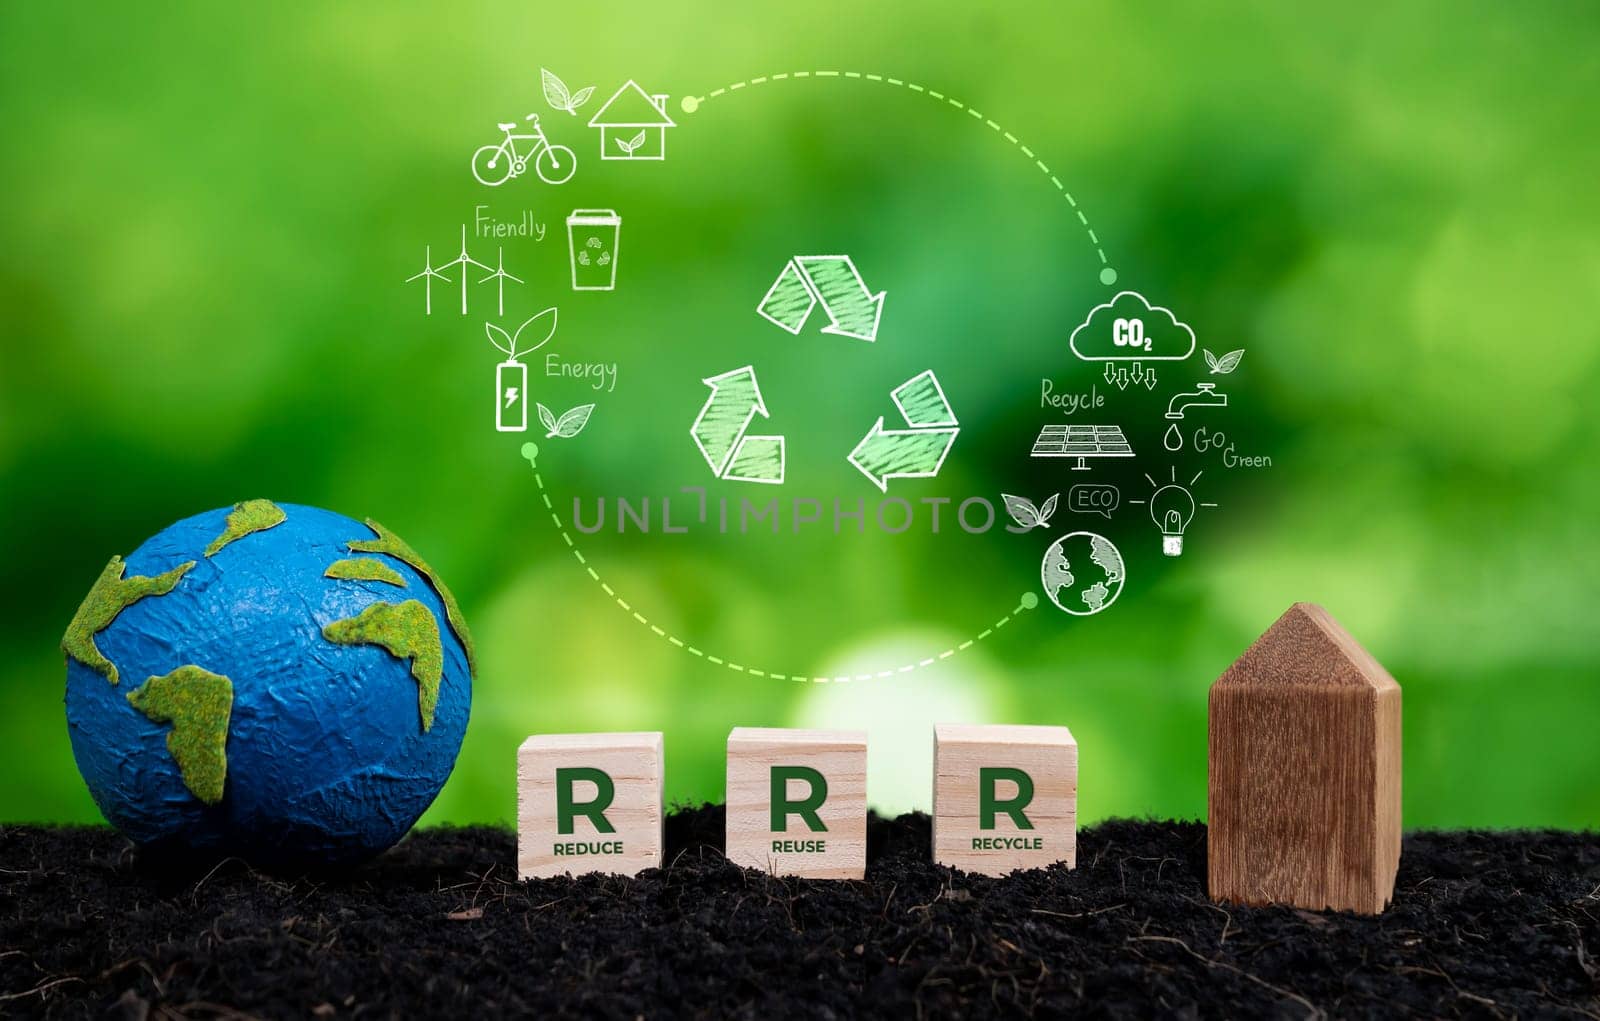 Eco friendly green business company commitment to waste recycling. Reliance by biancoblue